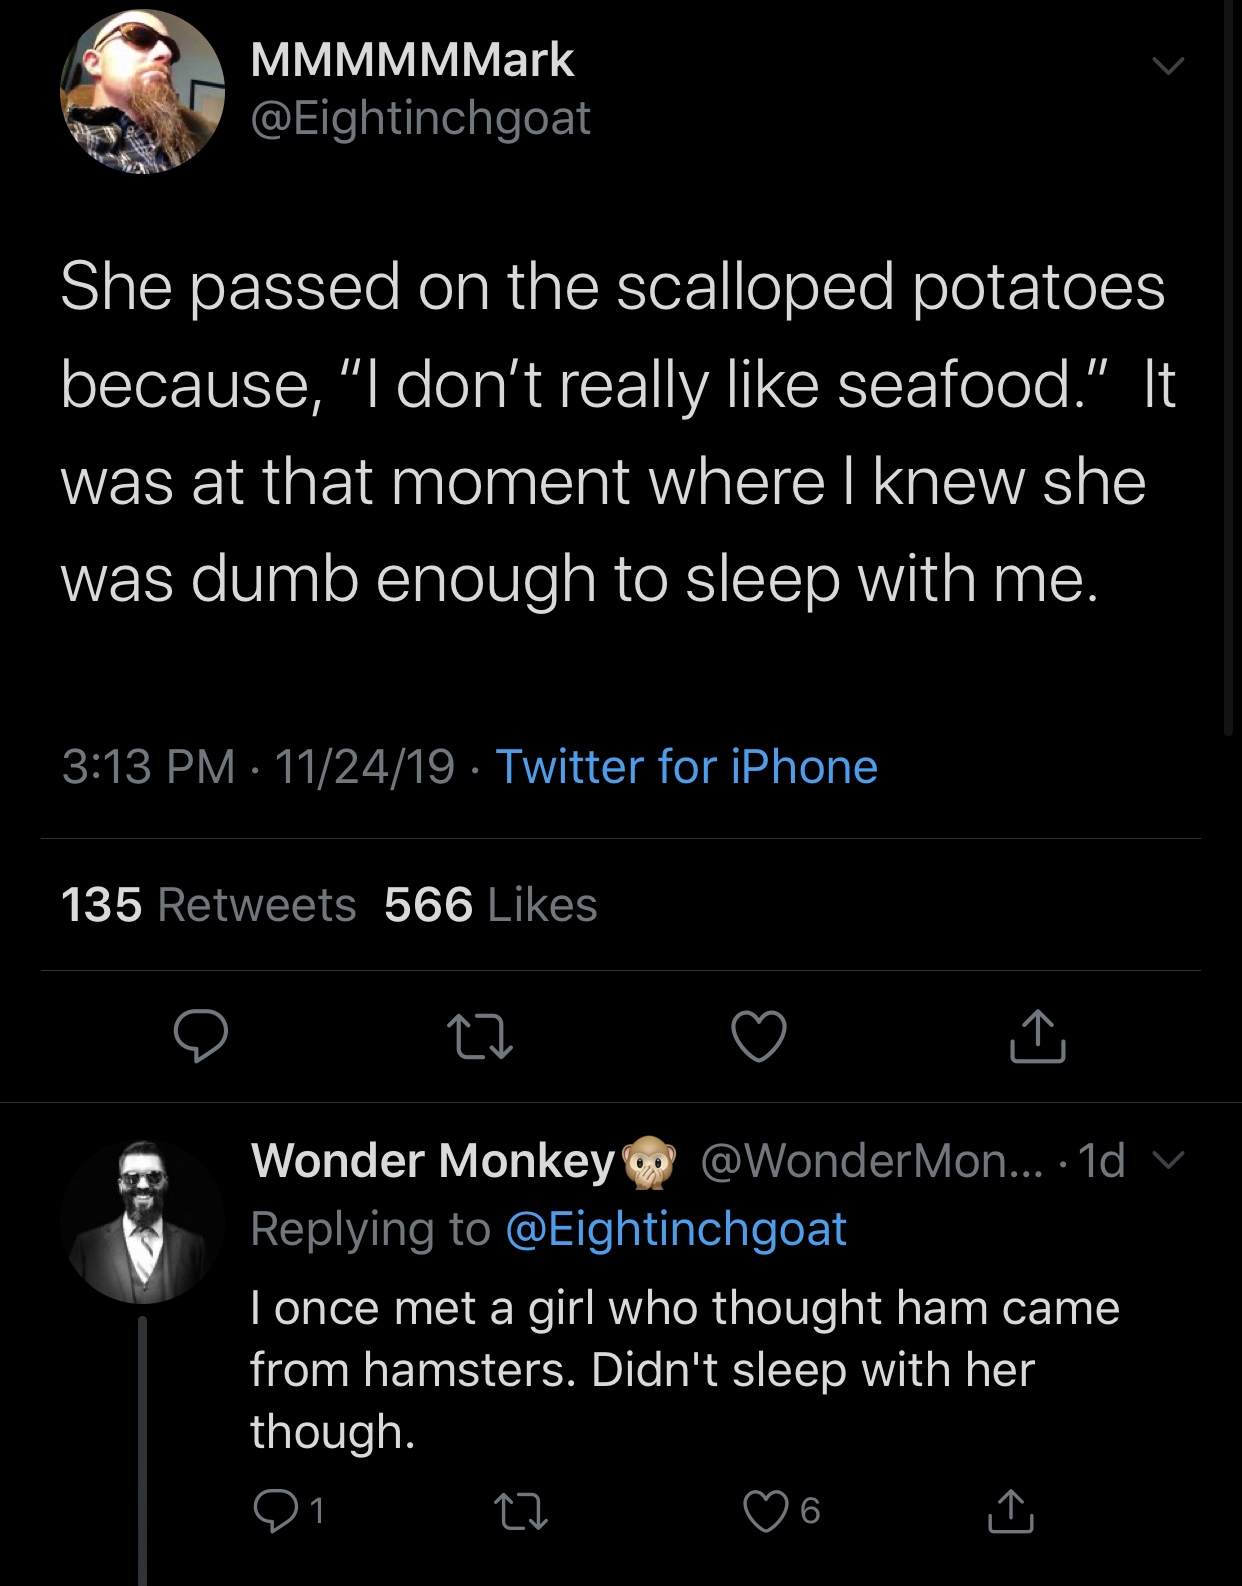 meme - screenshot - MMMMMMark She passed on the scalloped potatoes because, I don't really seafood." It was at that moment where I knew she was dumb enough to sleep with me. 112419 . Twitter for iPhone 135 566 Wonder Monkey Mon... 1d v Tonce met a girl wh